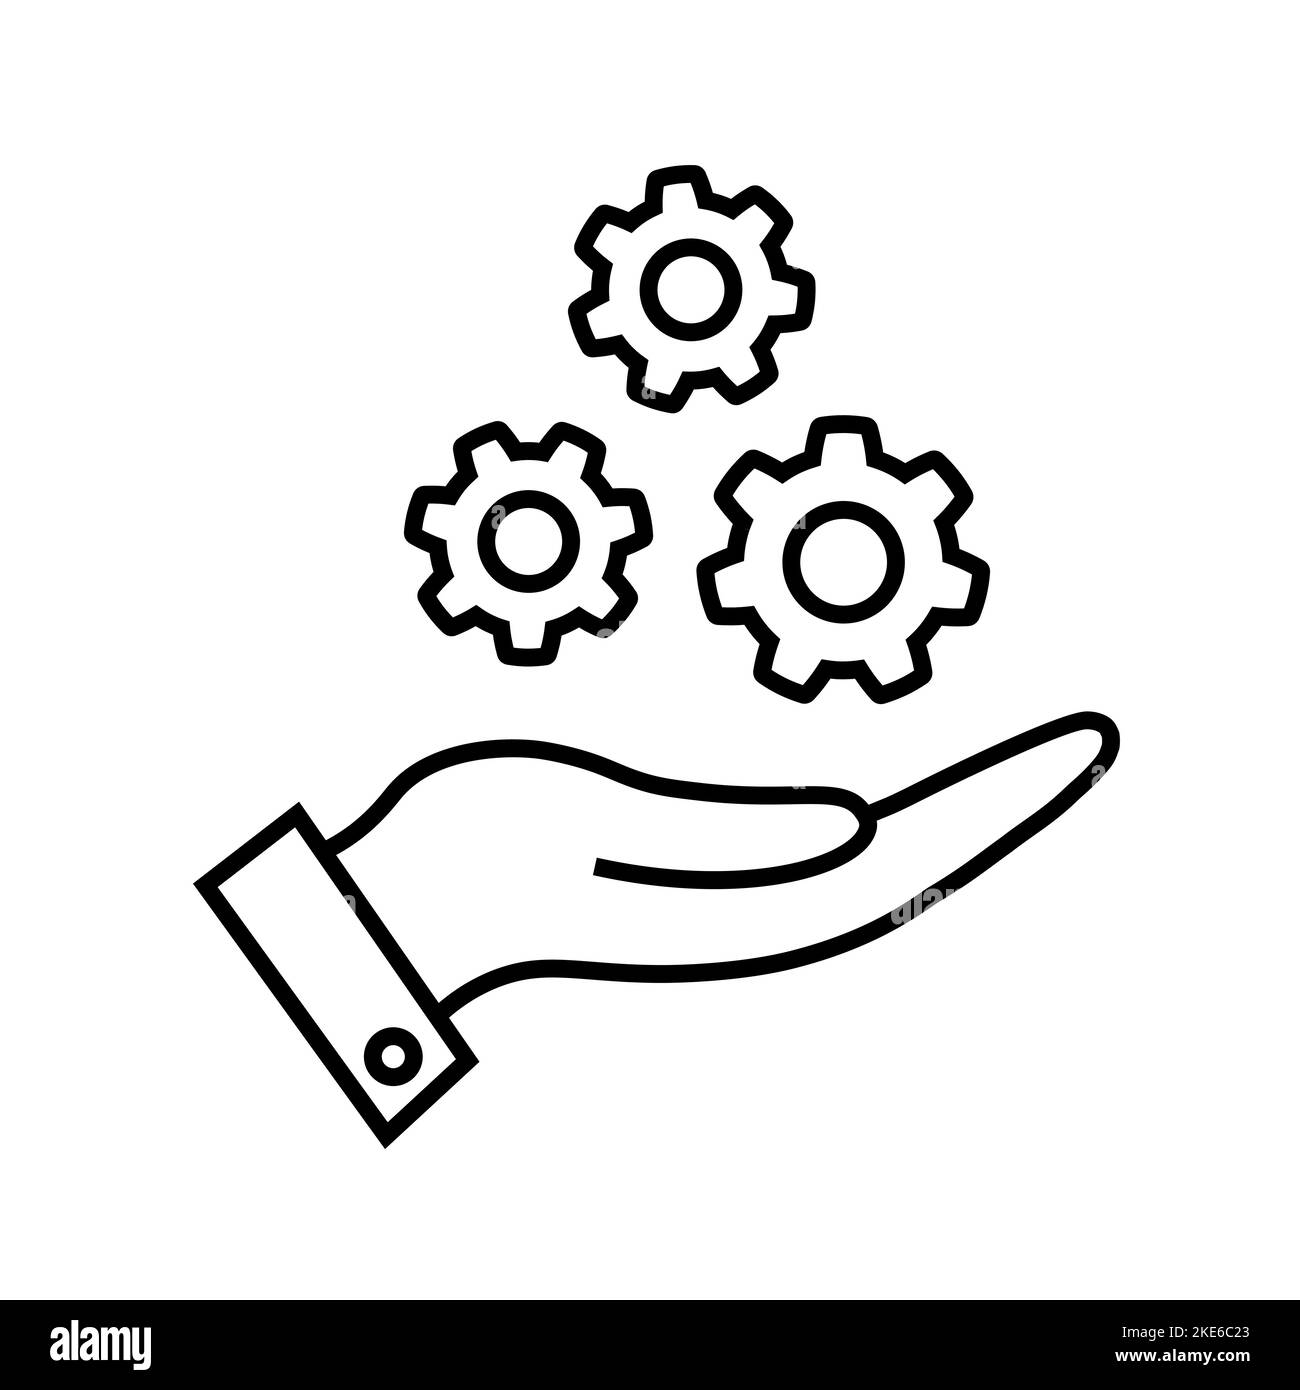 Gear wheel in hand. The process symbol on white. Stock Vector